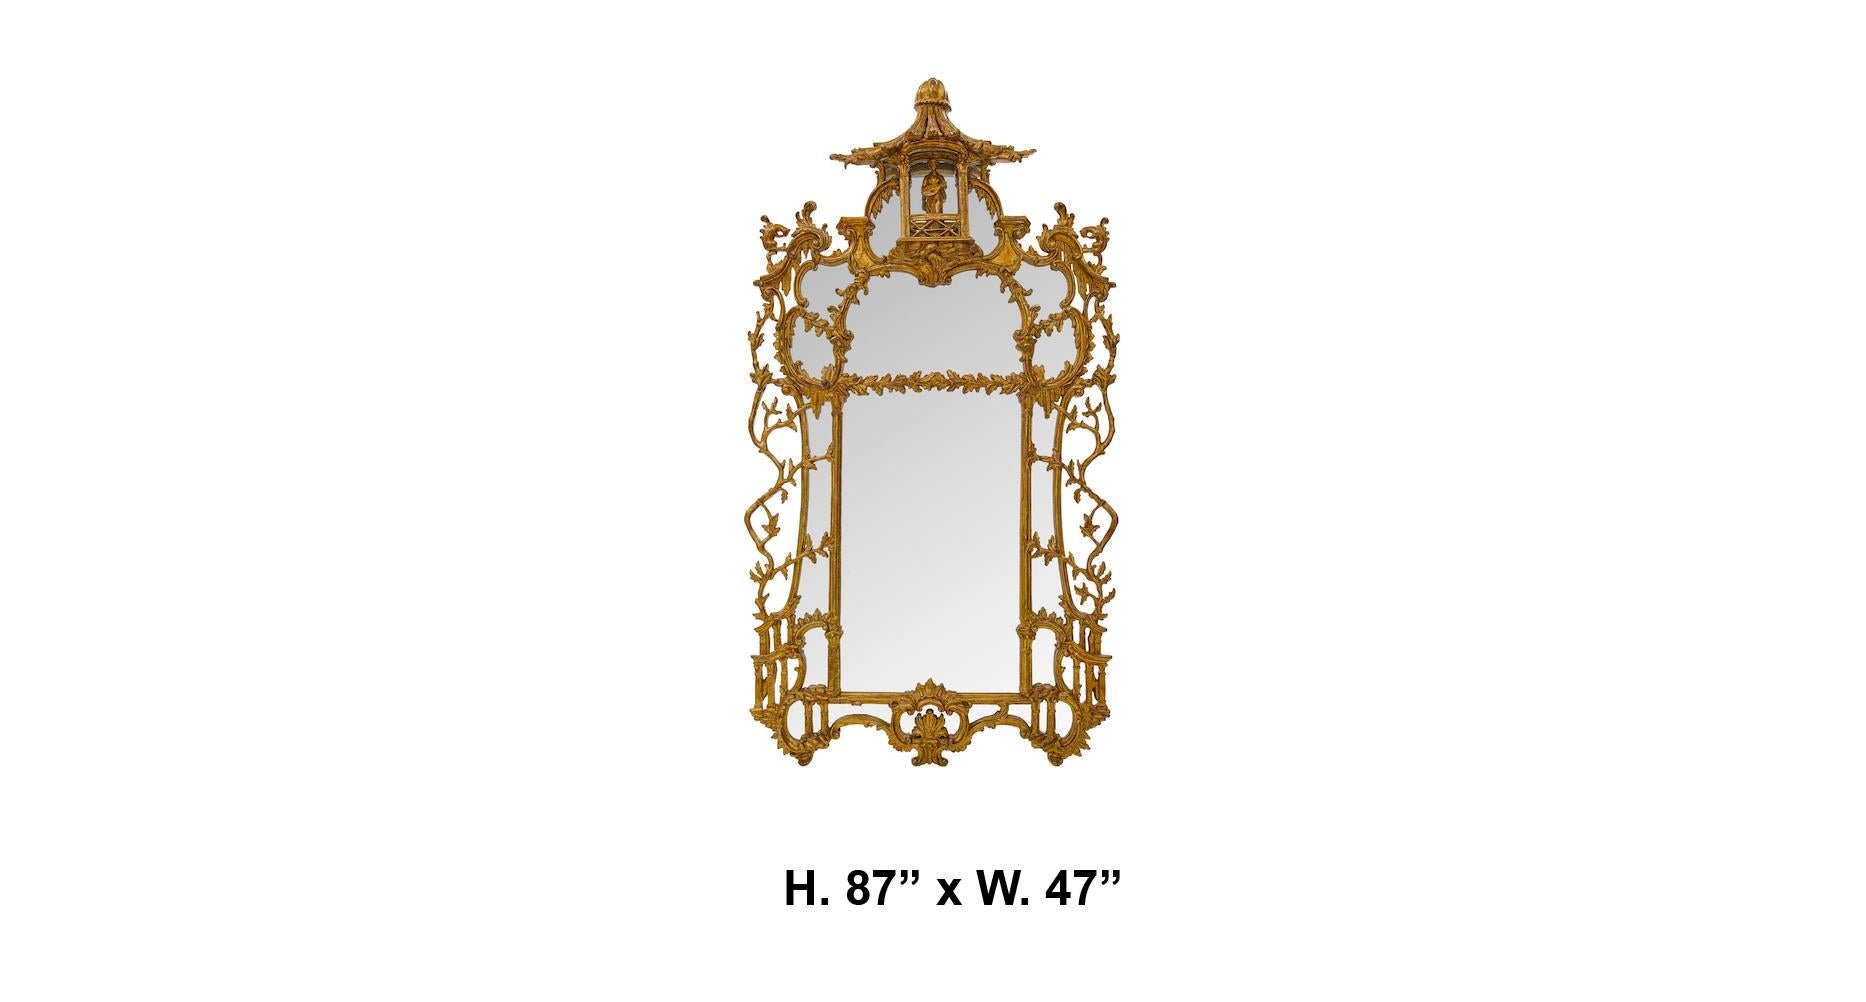 Exceptional 19th century George III style Chippendale style carved giltwood mirror. The work is surmounted by an intricately carved balcony encasing a small gilt musician with musical instrument over mirror surrounded by carved laurel leaves with